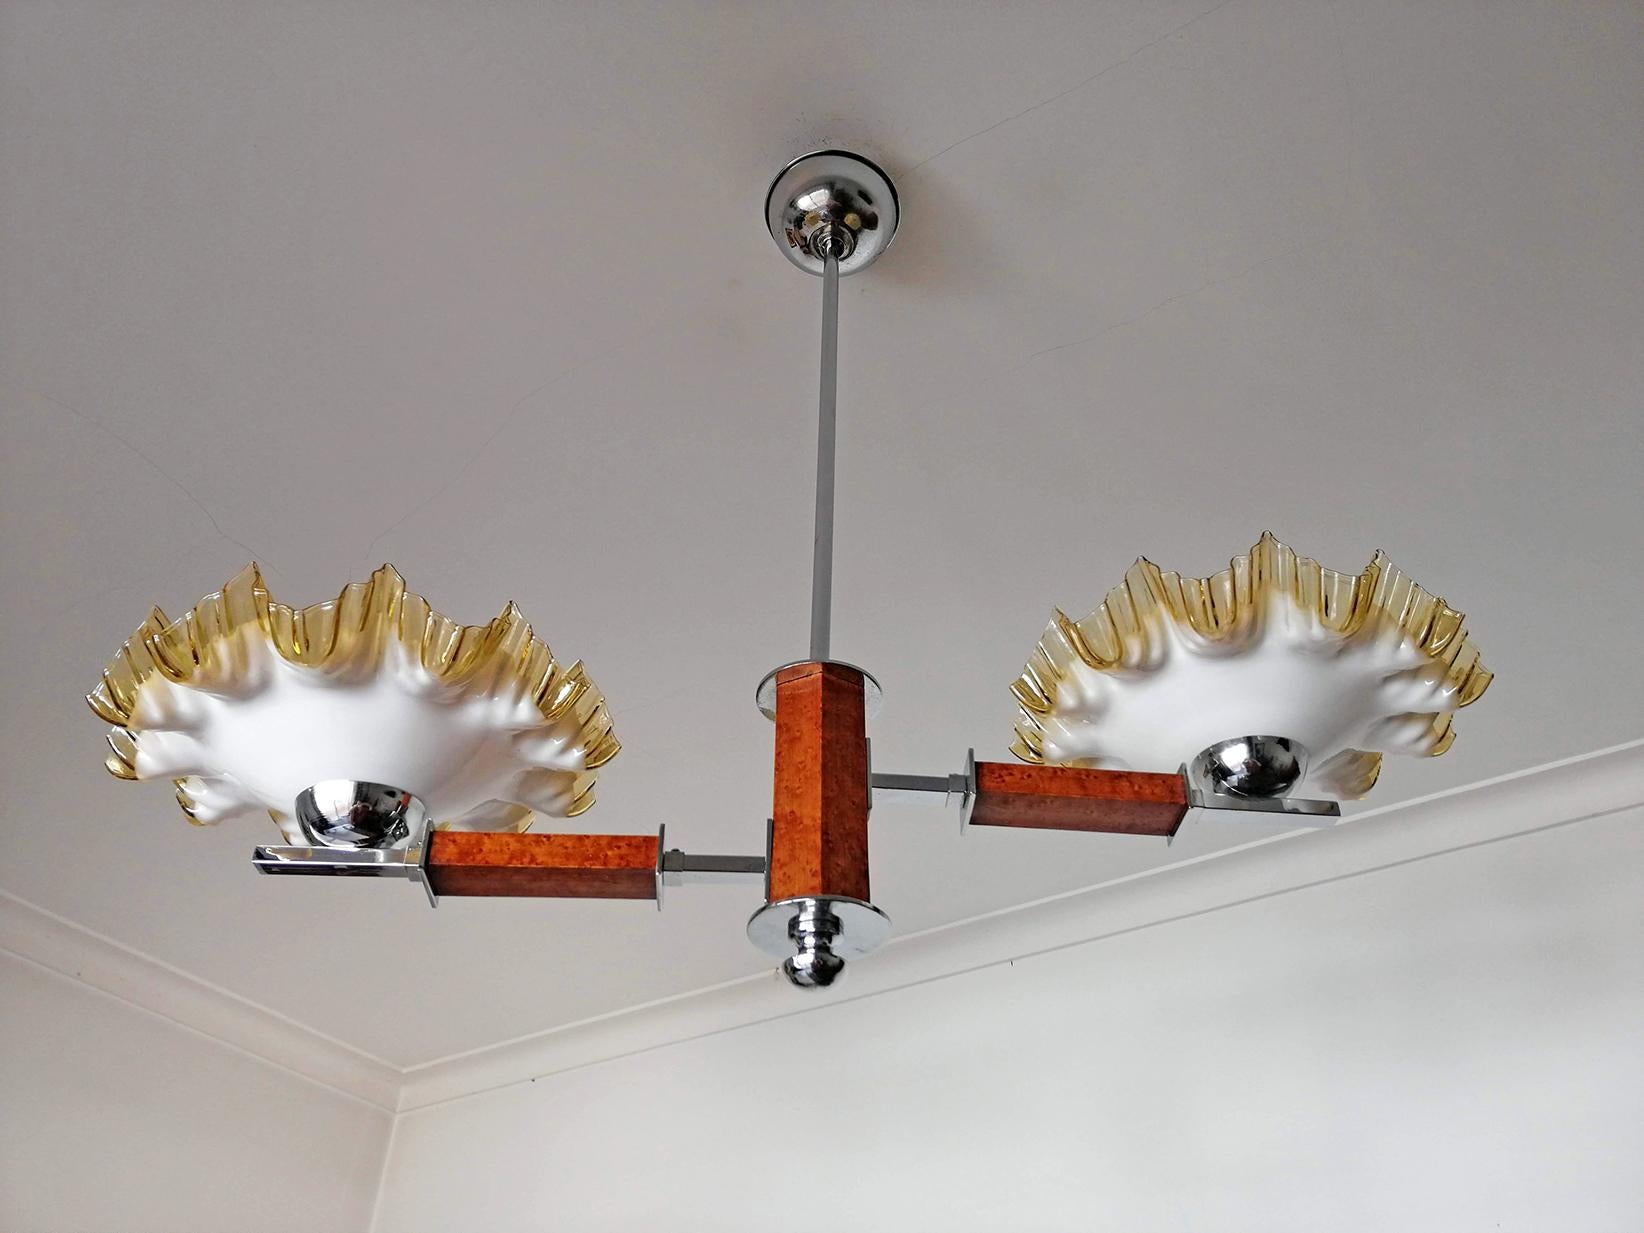 Fabulous Bauhaus French Art Deco with gorgeous opaline cased ruffled glass shades/chromed brass 2-light chandelier.
Measures:
Width 32 in/ 81 cm
Height 28.5 in/ 72 cm
Depth 11 in / 28 cm
Weight: 7 lb/ 3 Kg
2 light bulbs E27/ good working